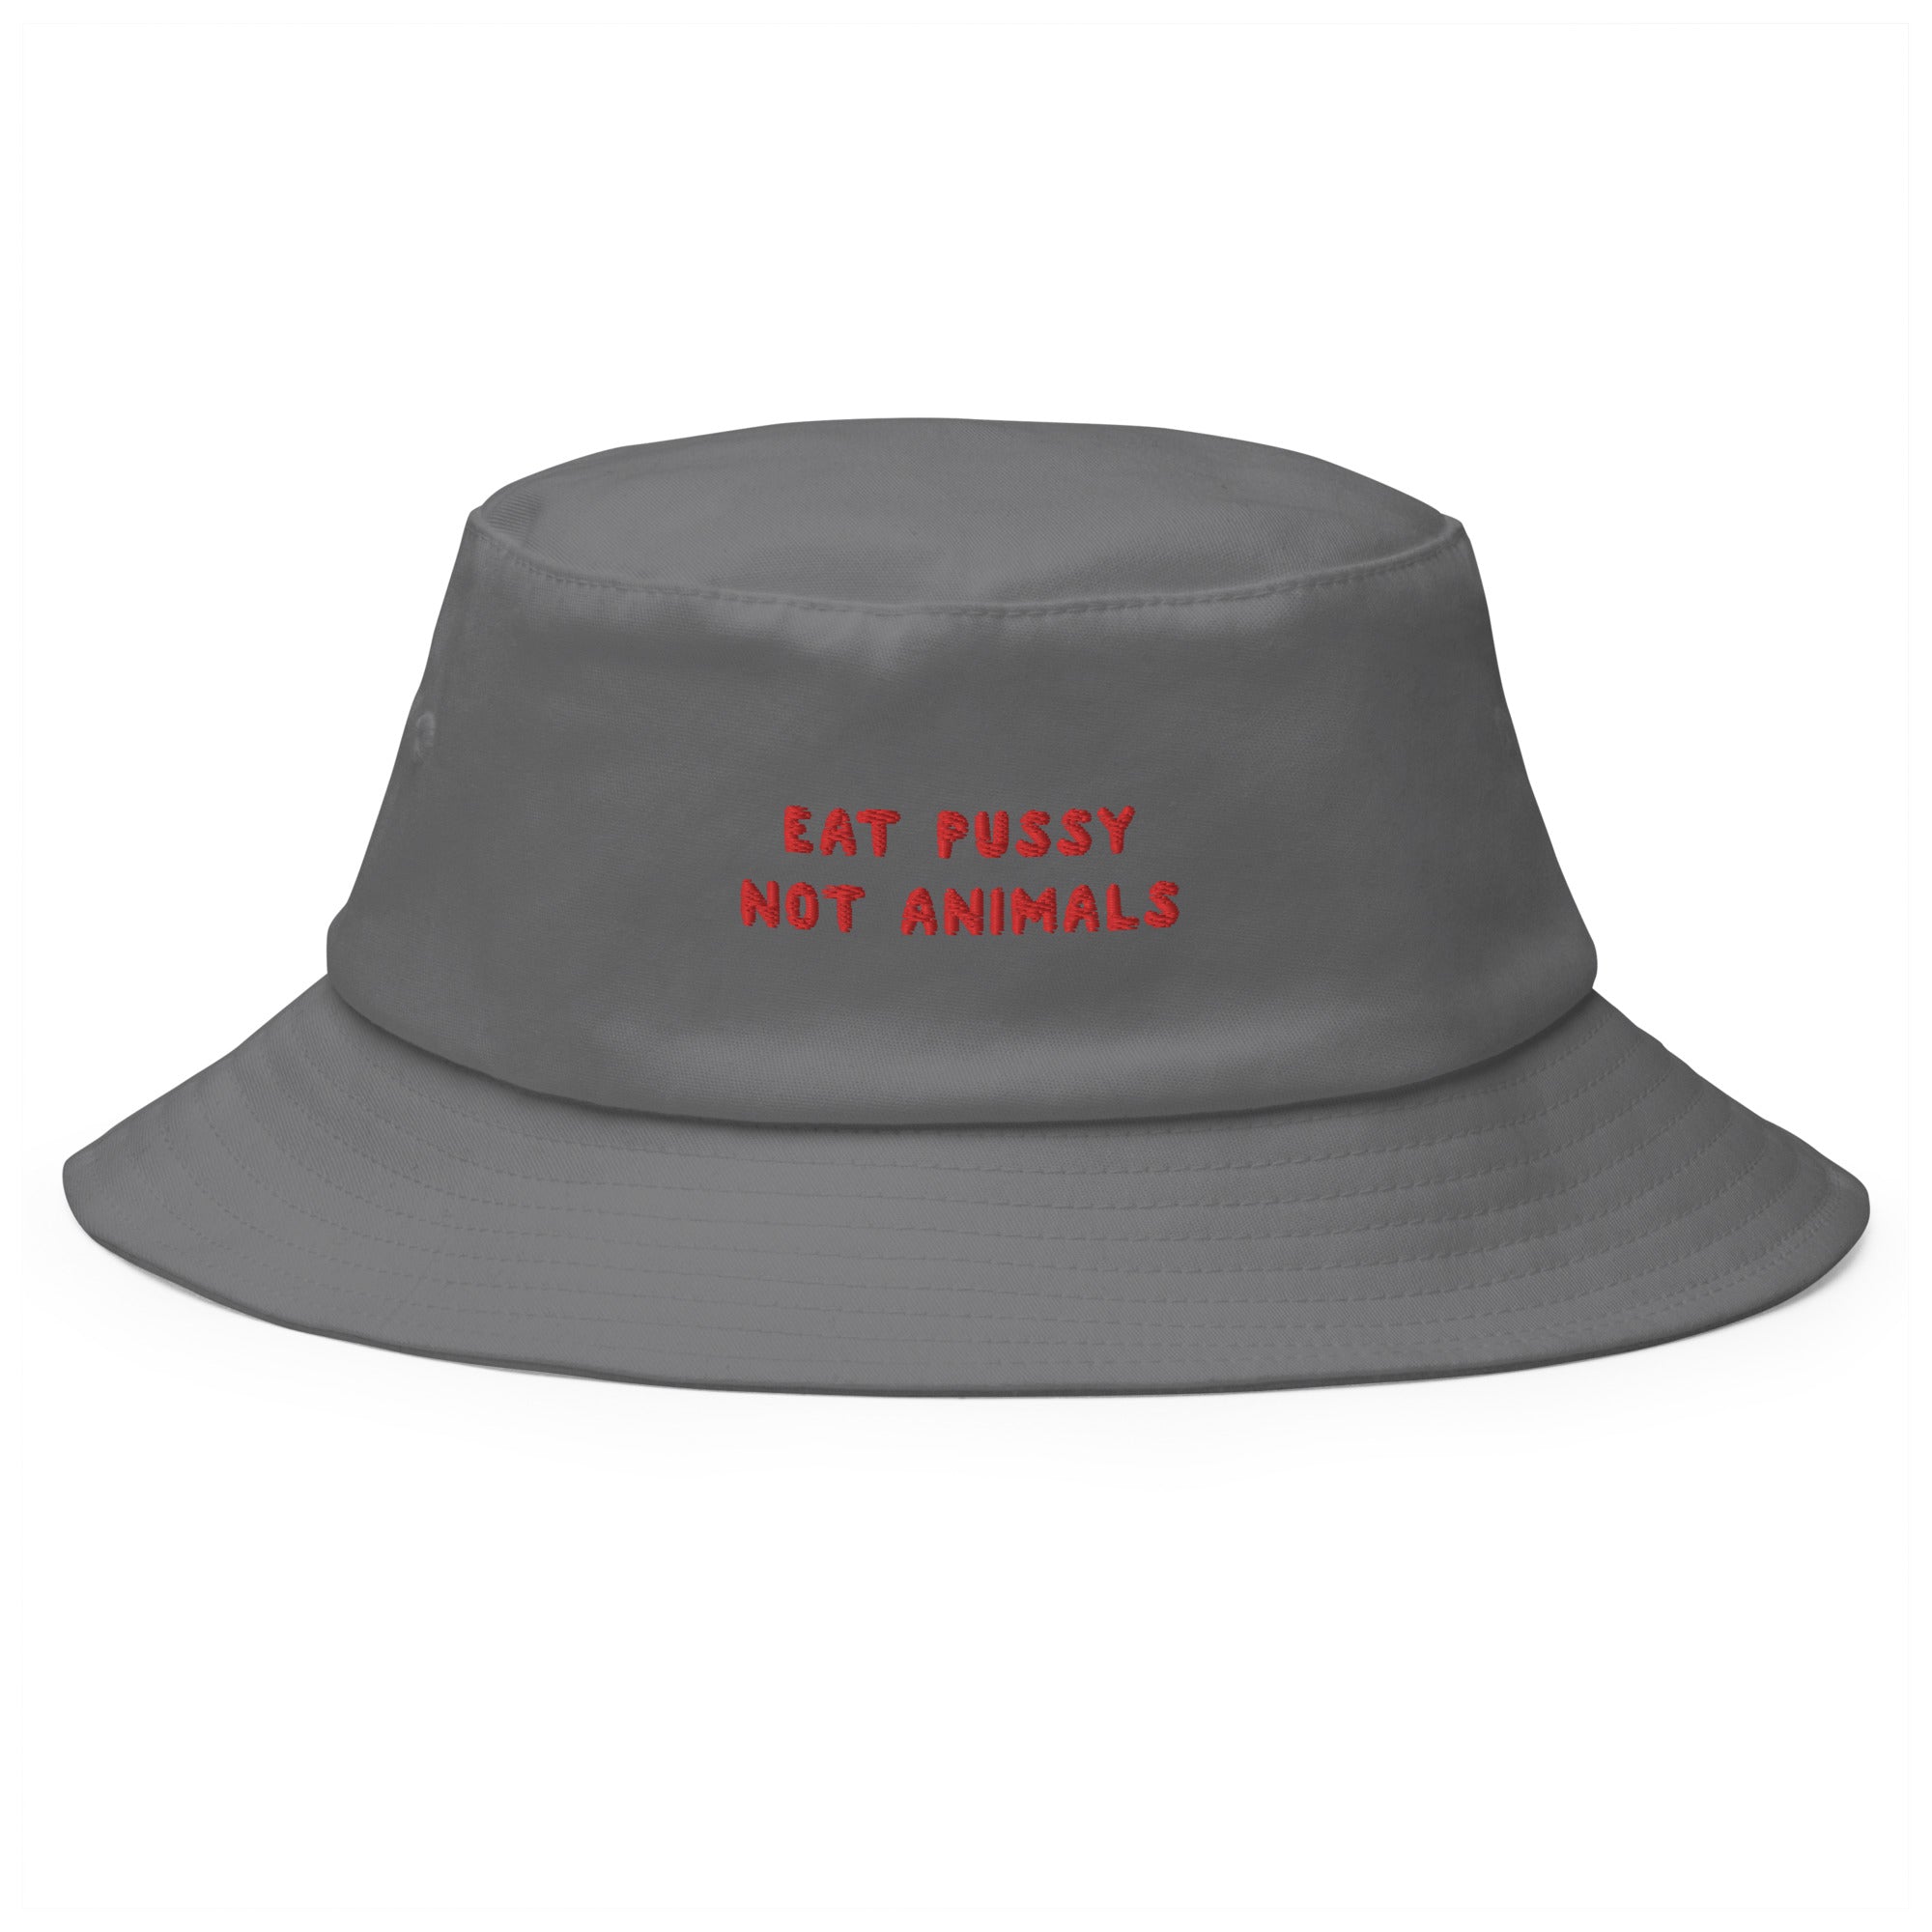 Eat Pussy not Animals - Embroidered Bucket Hat